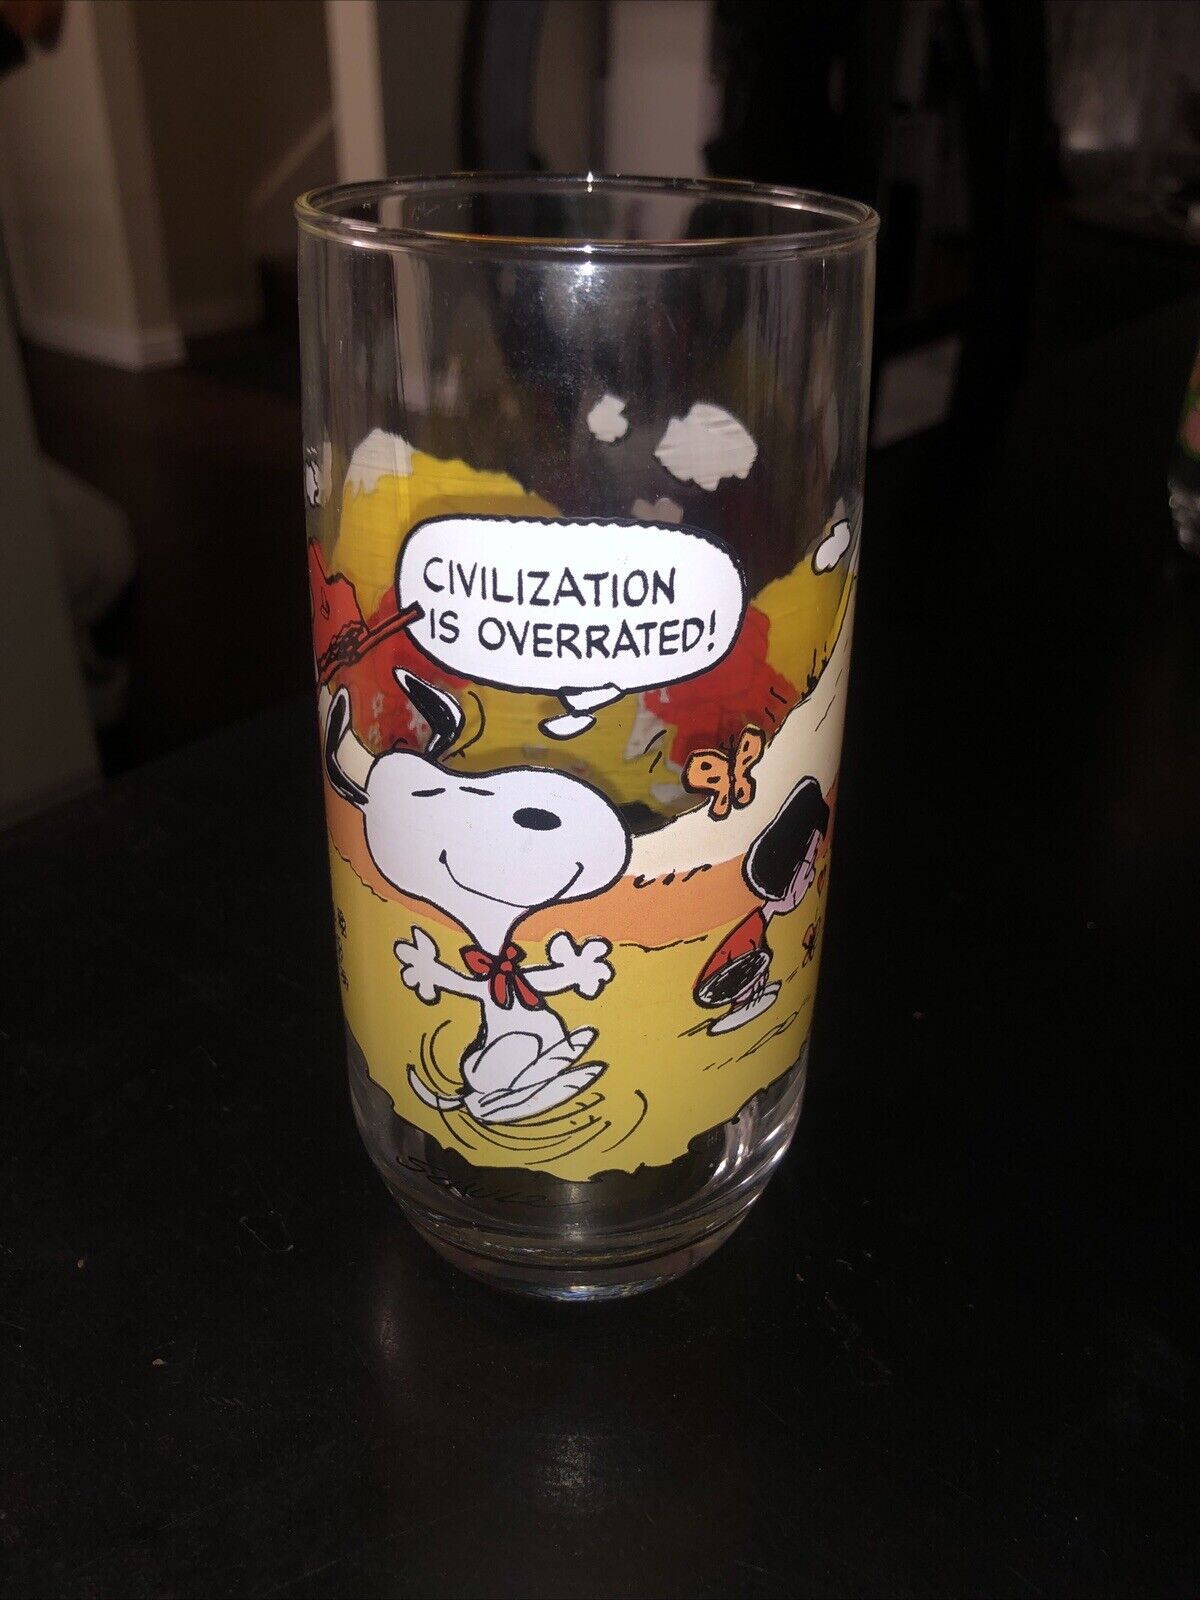 Vintage 1971 Peanuts Camp Snoopy “Civilization is Overrated” McDonald’s Glass